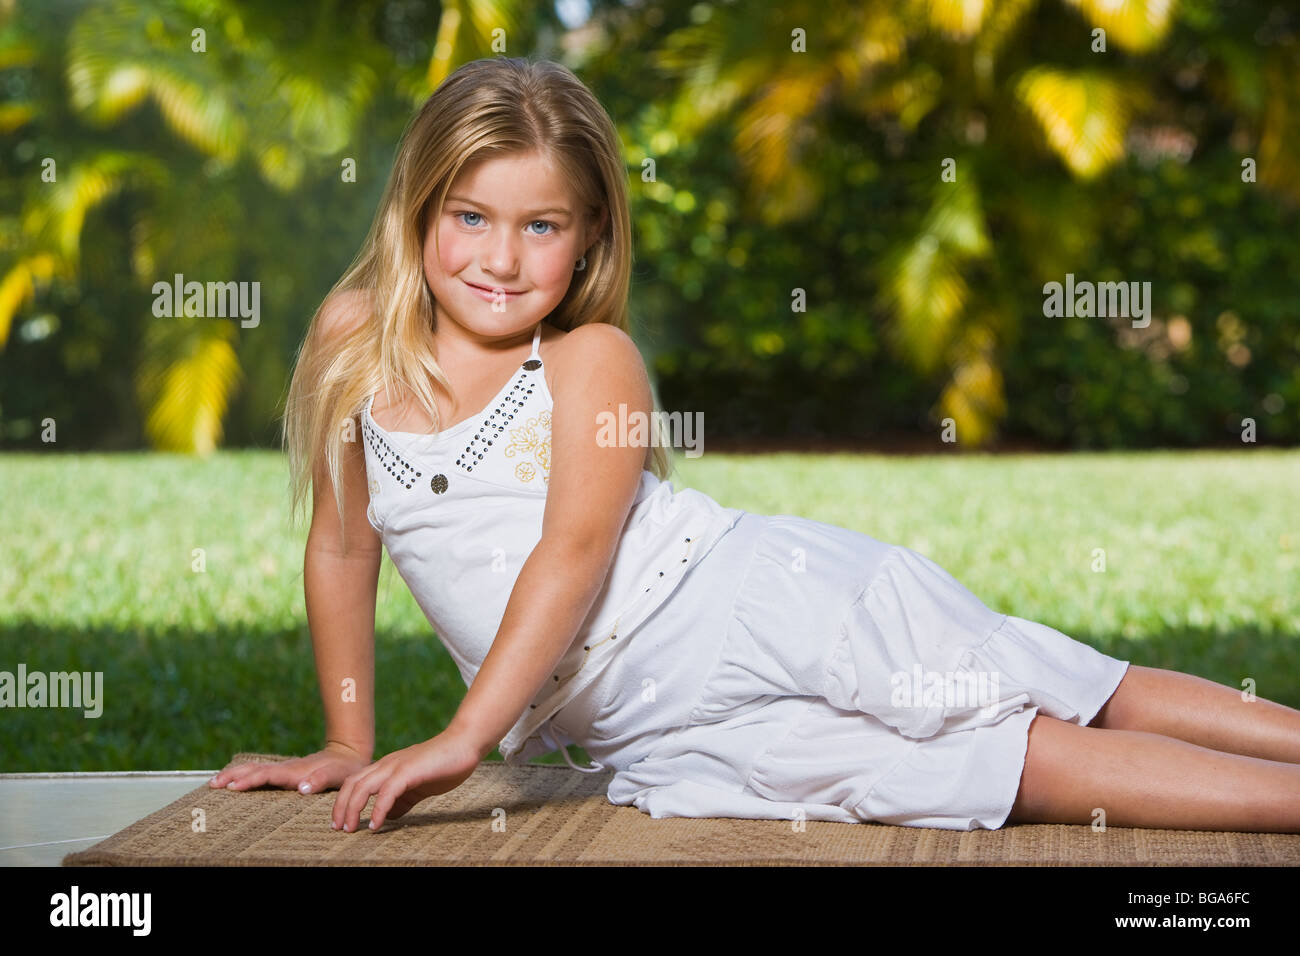 Blond girl laying down on rug, smiling, portrait Stock Photo